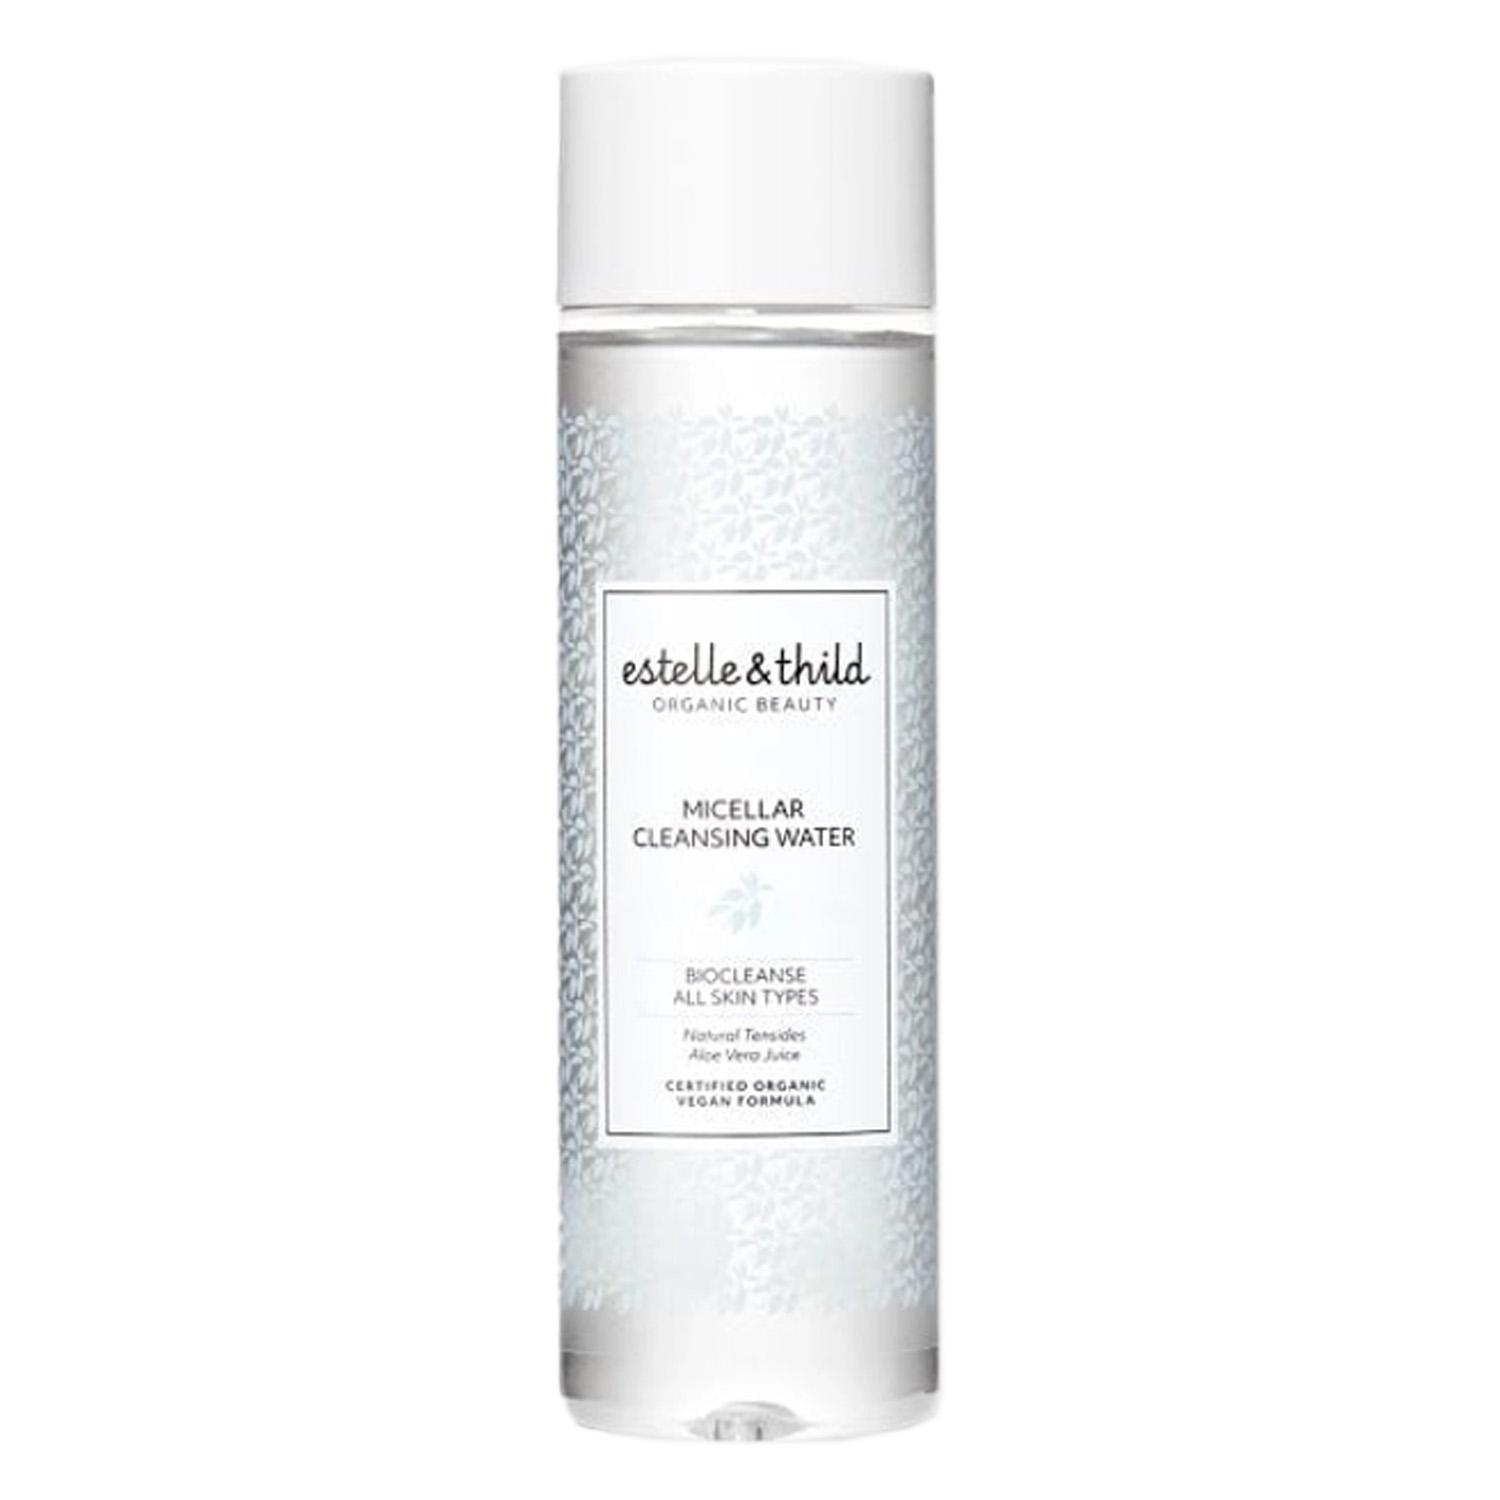 Estelle&Thild Care - Micellar Cleansing Water